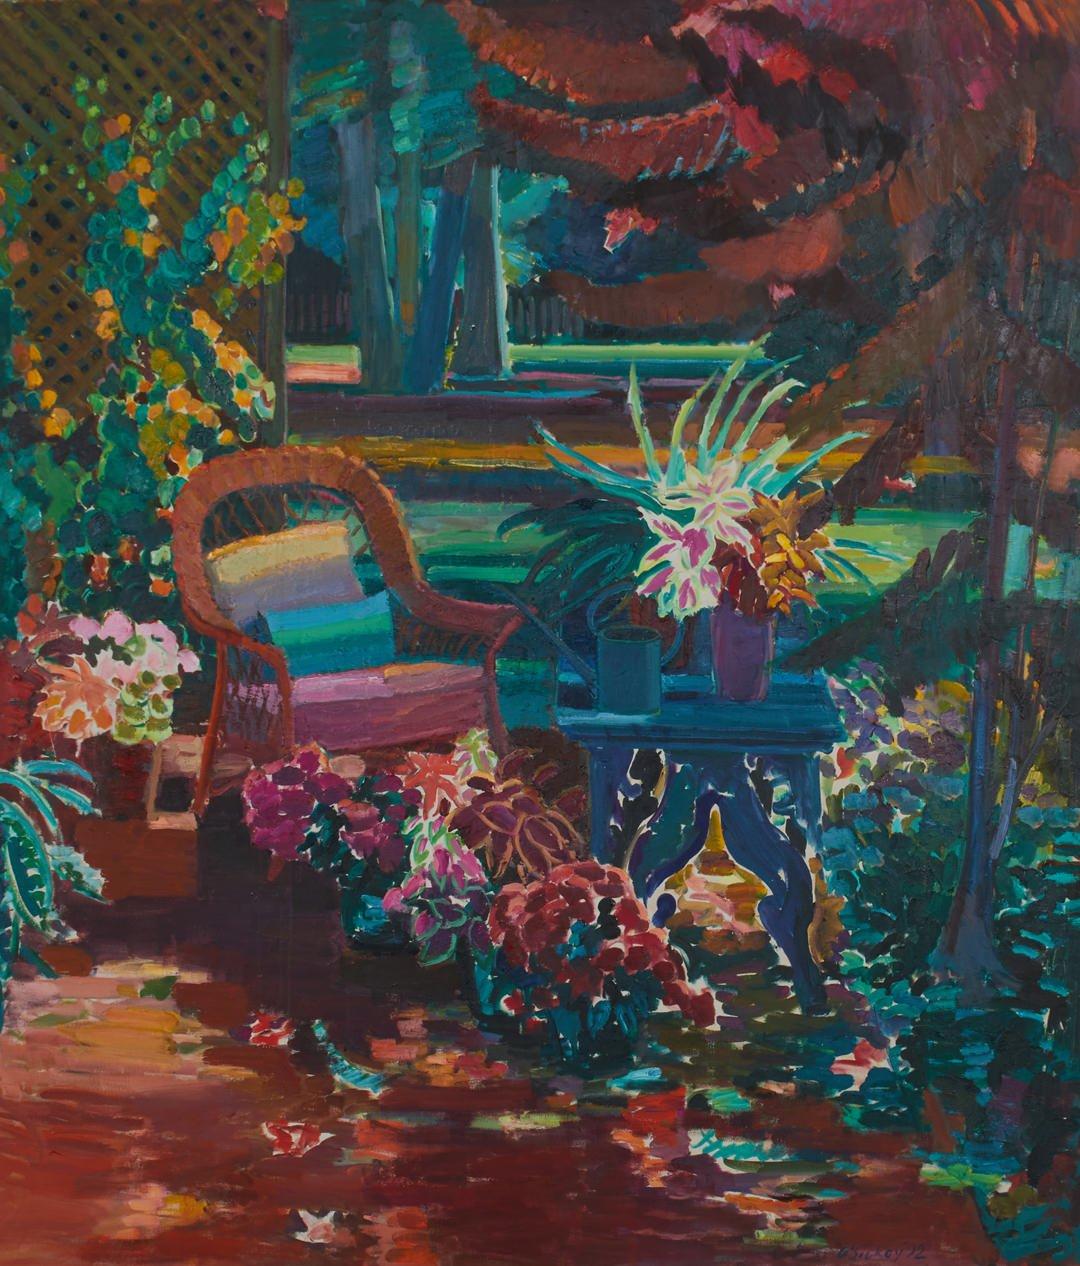 October Terrace, Colorful Landscape Still Life with Trees, Flowers